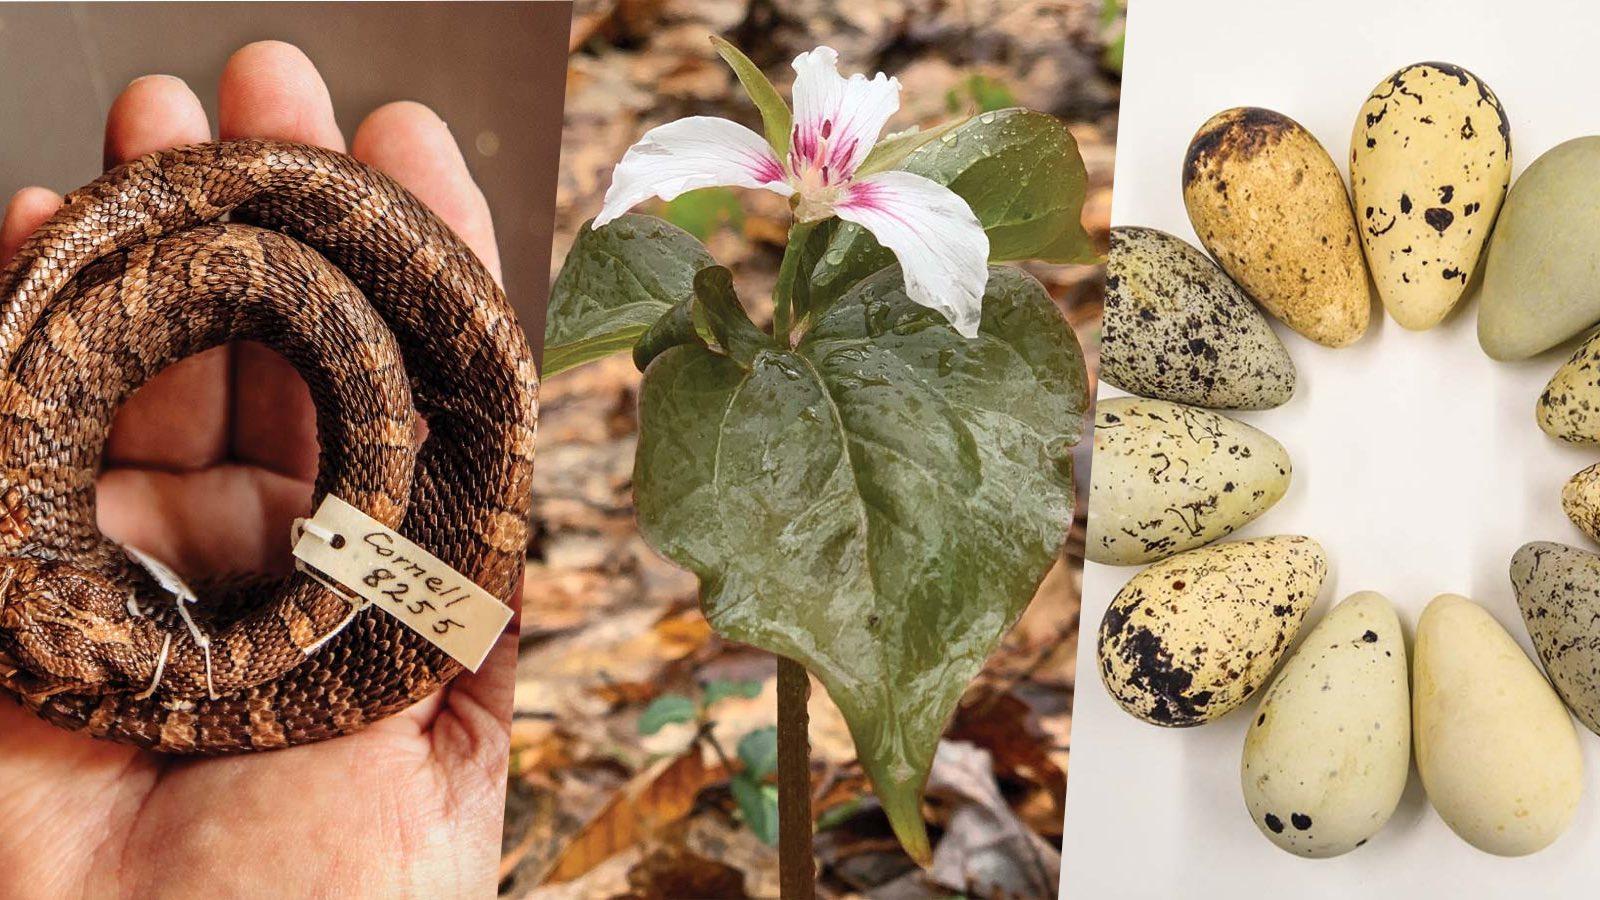 Image of a snake, trillium flower and eggs